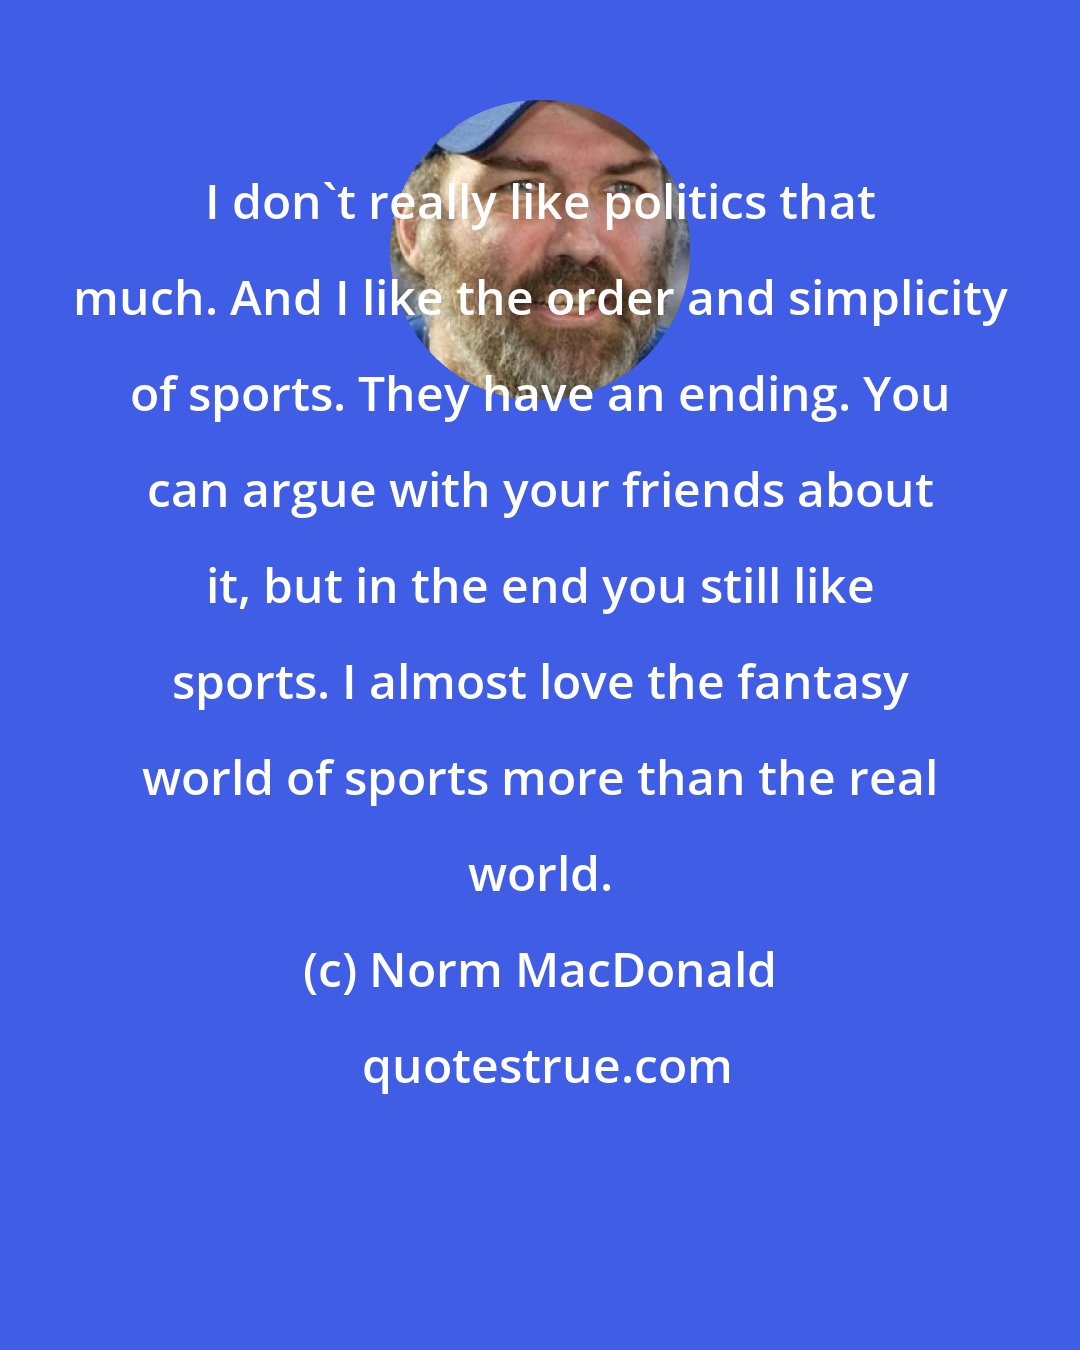 Norm MacDonald: I don't really like politics that much. And I like the order and simplicity of sports. They have an ending. You can argue with your friends about it, but in the end you still like sports. I almost love the fantasy world of sports more than the real world.